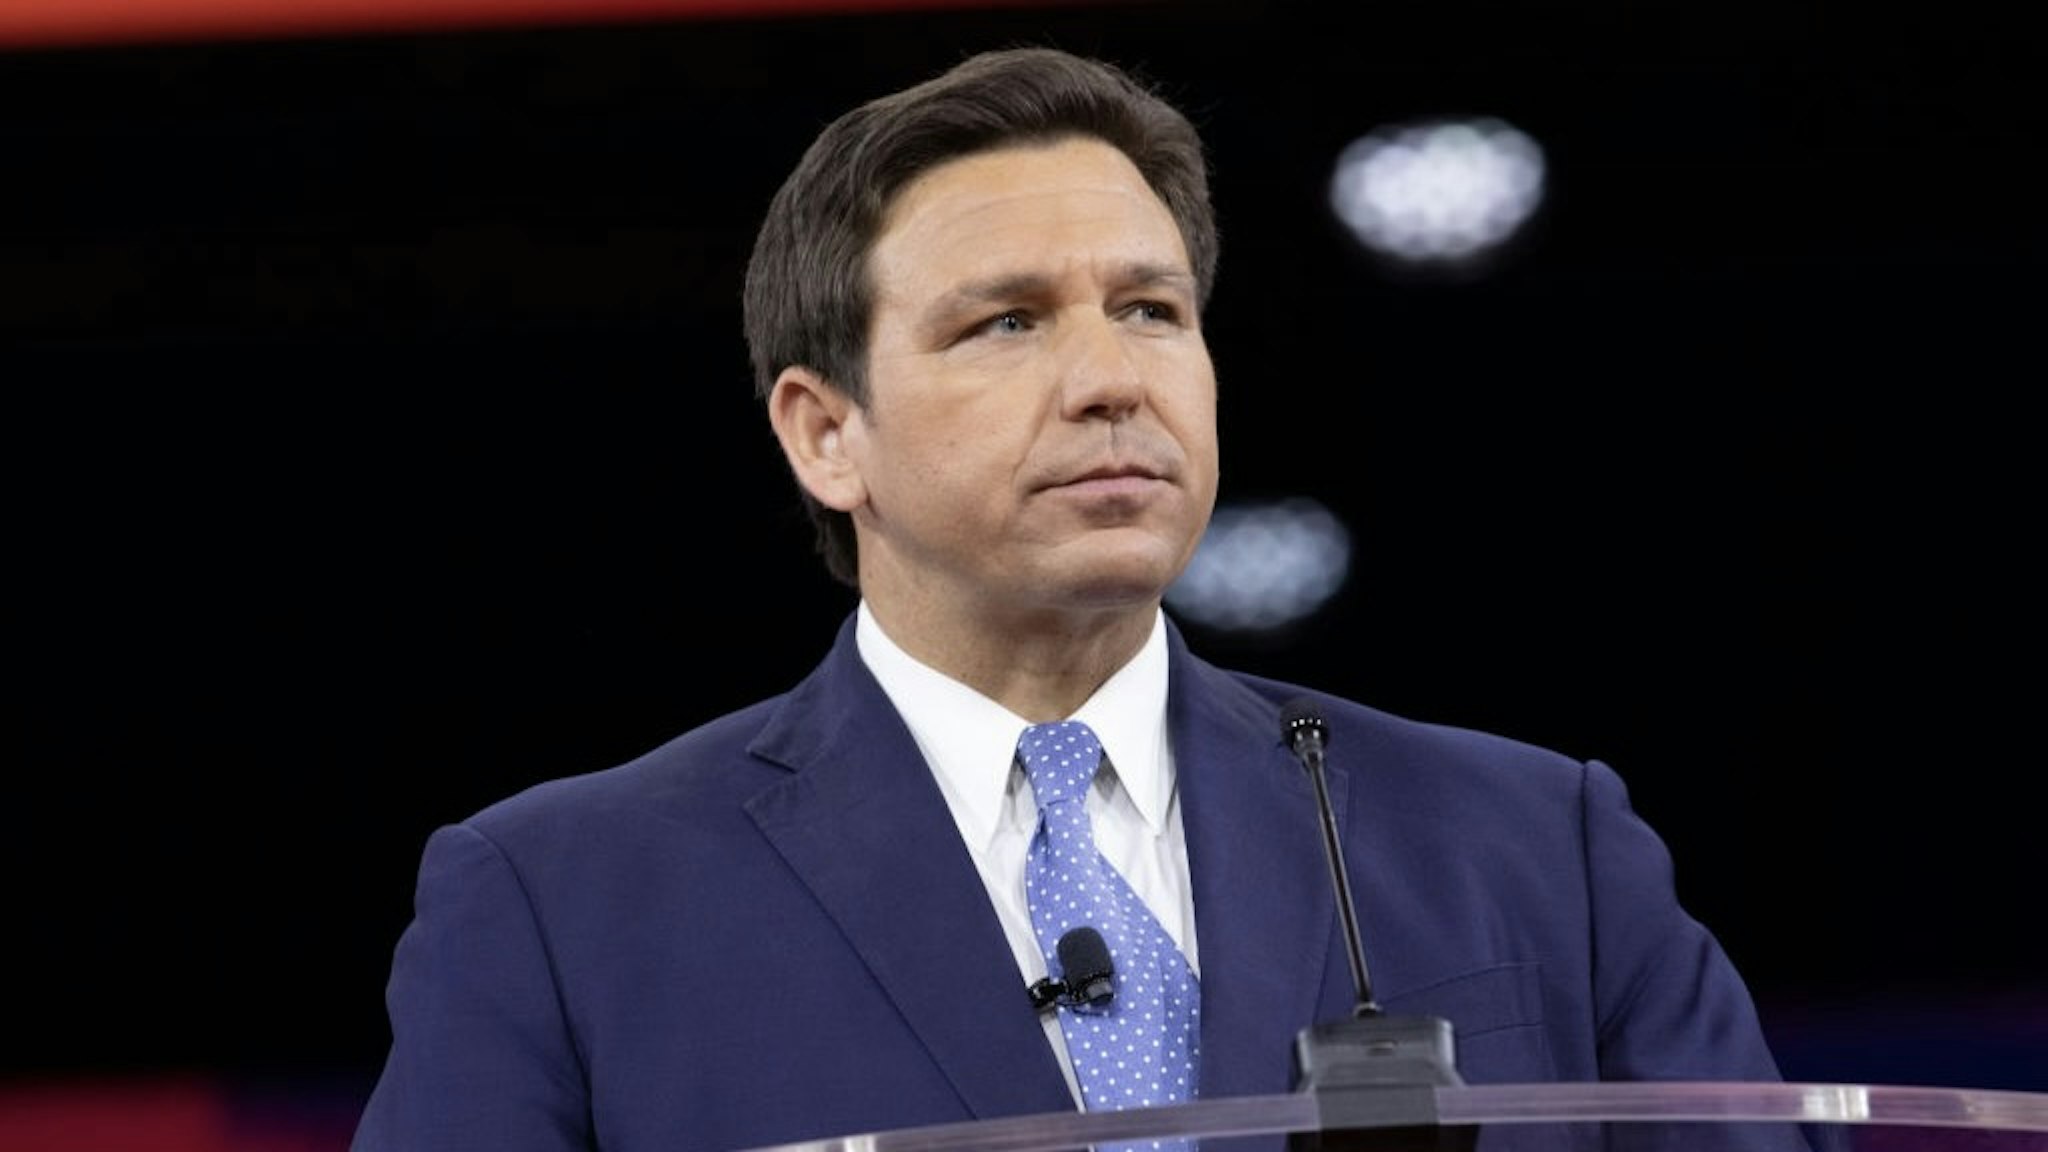 Key Speakers At Conservative Political Action Conference Ron DeSantis, governor of Florida, speaks during the Conservative Political Action Conference (CPAC) in Orlando, Florida, U.S., on Thursday, Feb. 24, 2022. Launched in 1974, the Conservative Political Action Conference is the largest gathering of conservatives in the world. Photographer: Tristan Wheelock/Bloomberg via Getty Images Bloomberg / Contributor